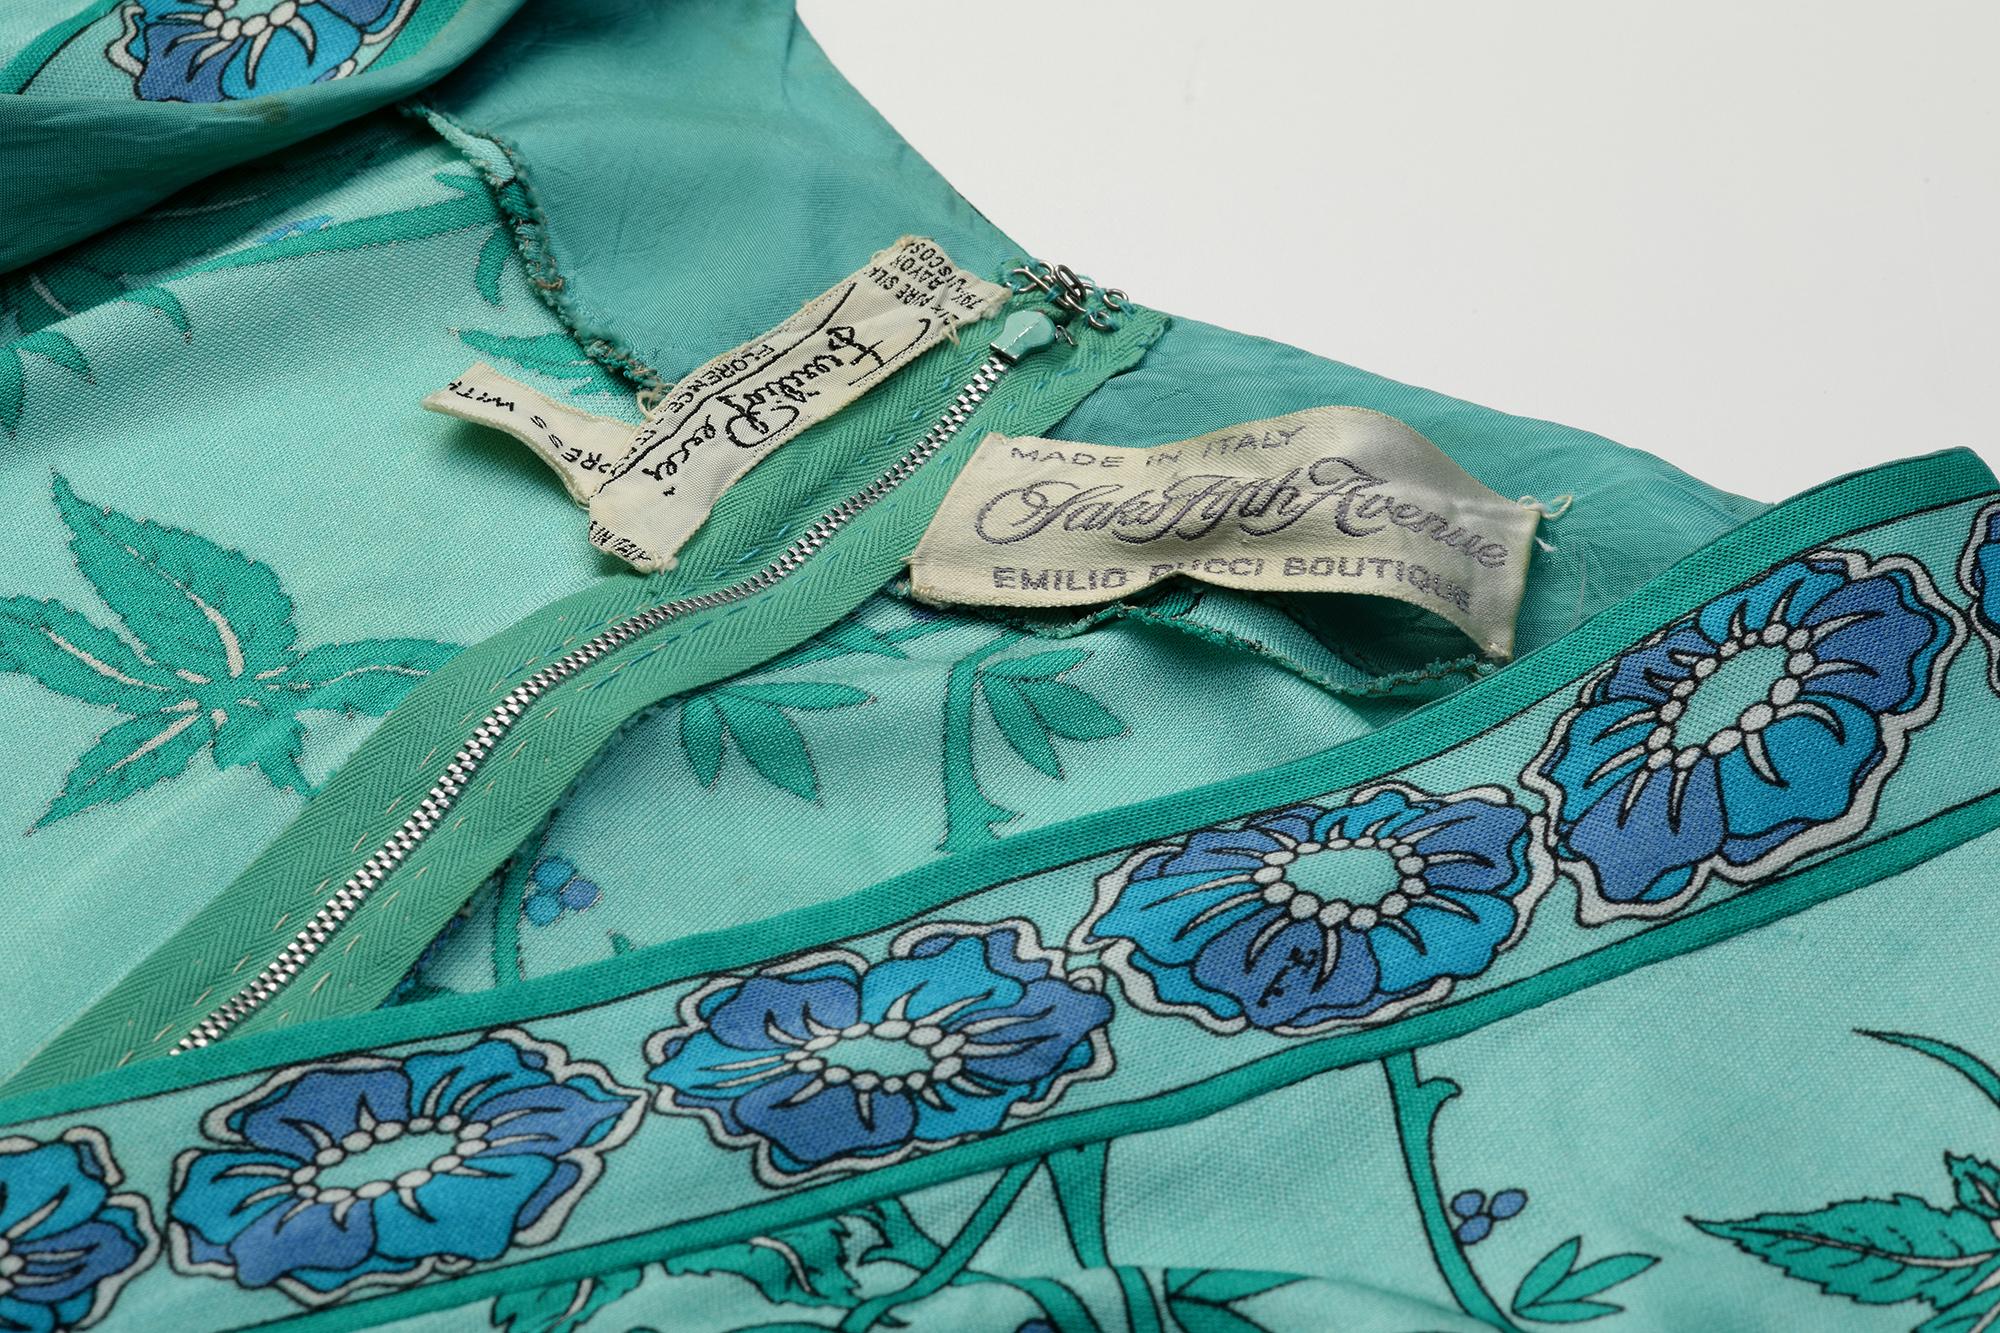 1970s Emilio Pucci Turquoise Silk Jersey Dress For Sale 2